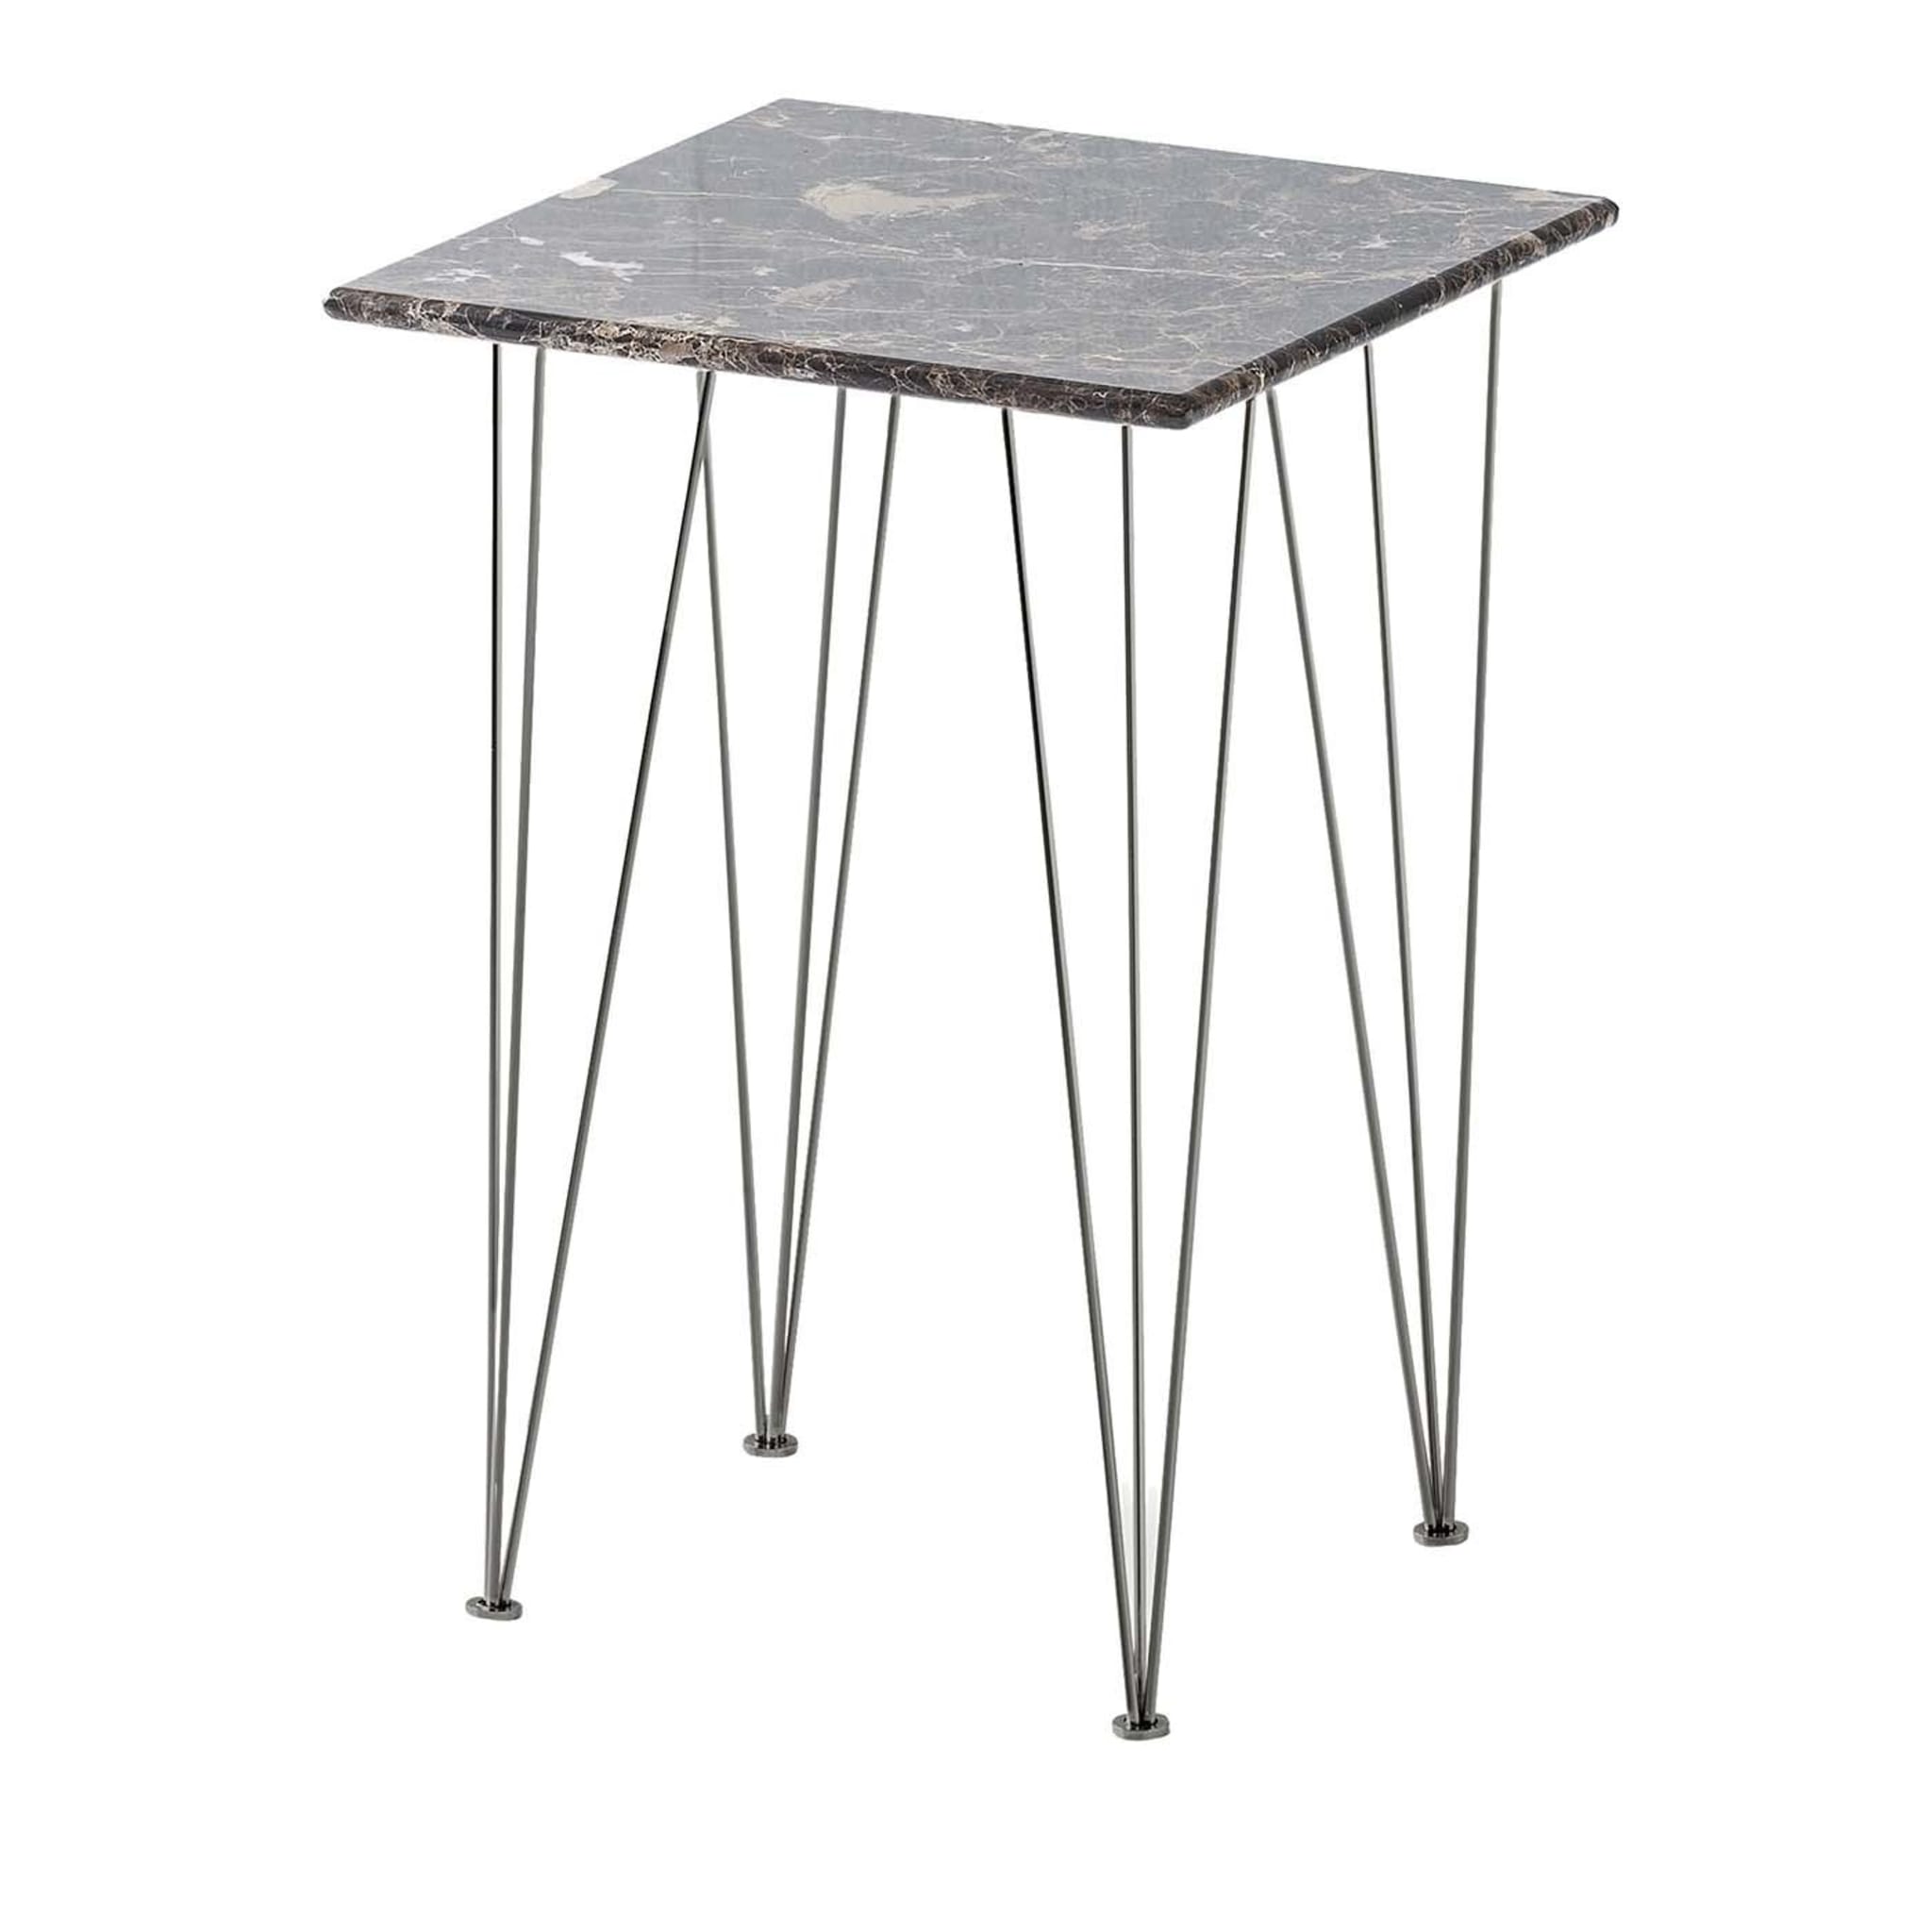 Flamingo Square Side Table with Black Legs - Main view